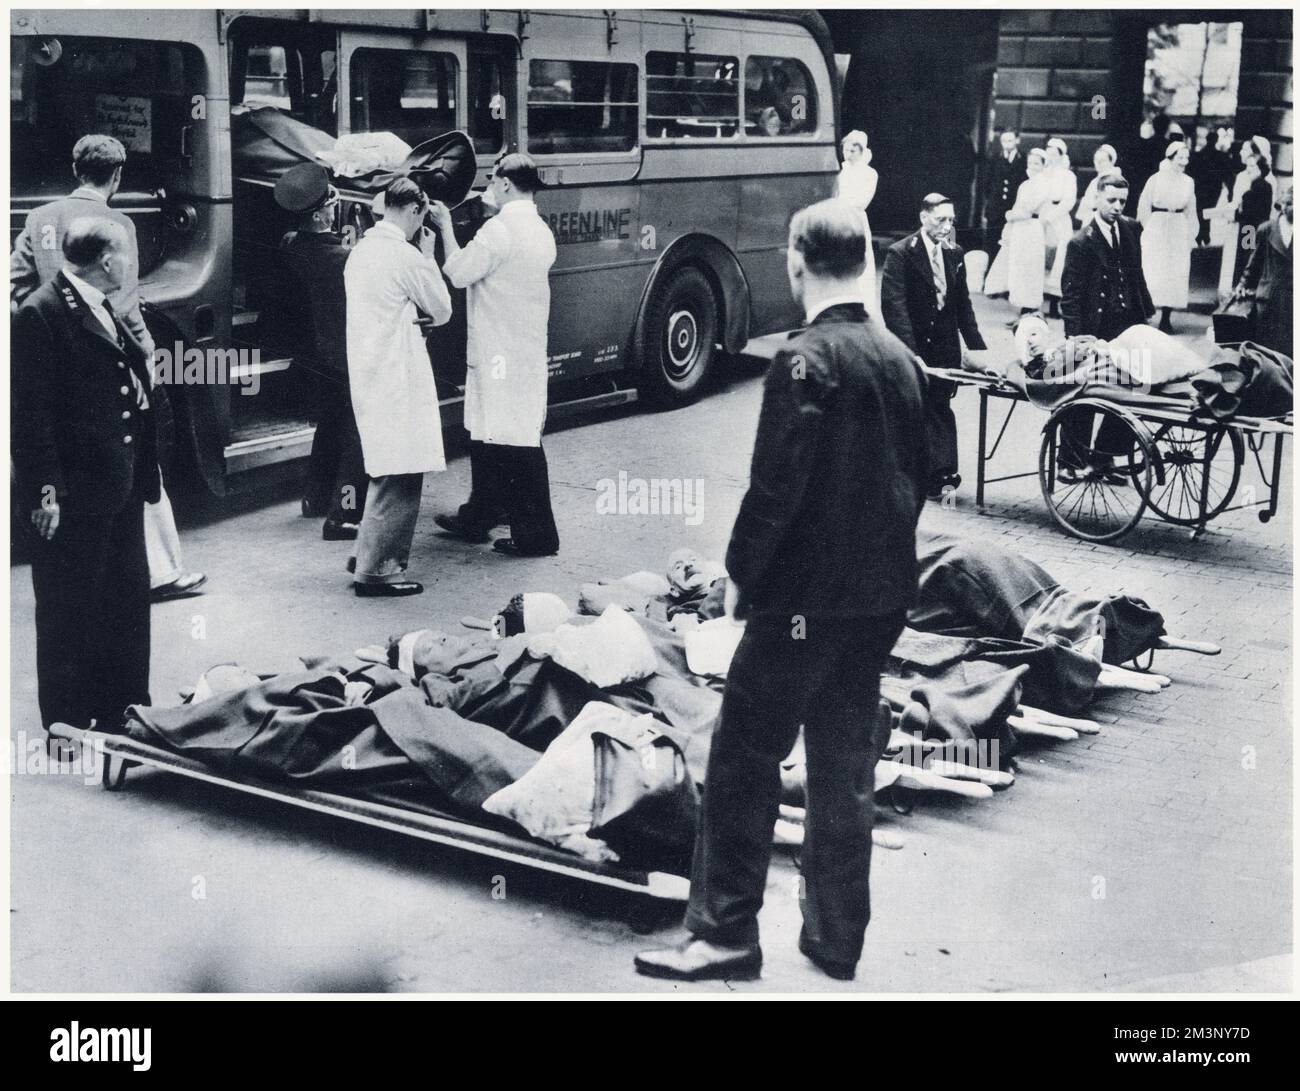 Evacuating hospital patients from a London hospital at the beginning of World War Two. For the evacuation of patients to the country, motor coaches were temporarily converted into motor ambulances. Stock Photo